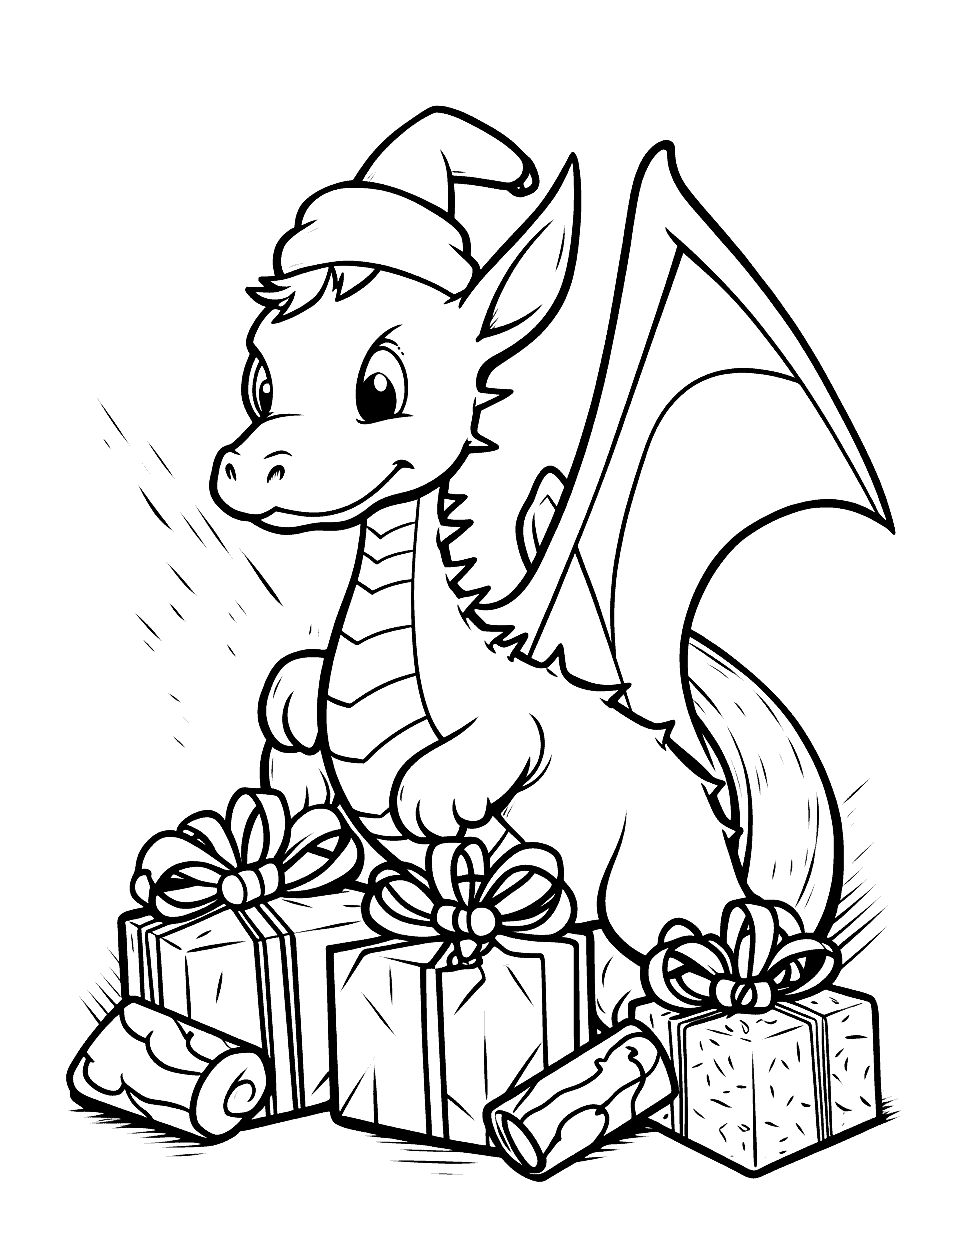 Christmas Dragon Coloring Page - A friendly dragon helping decorate the Christmas tree with gifts